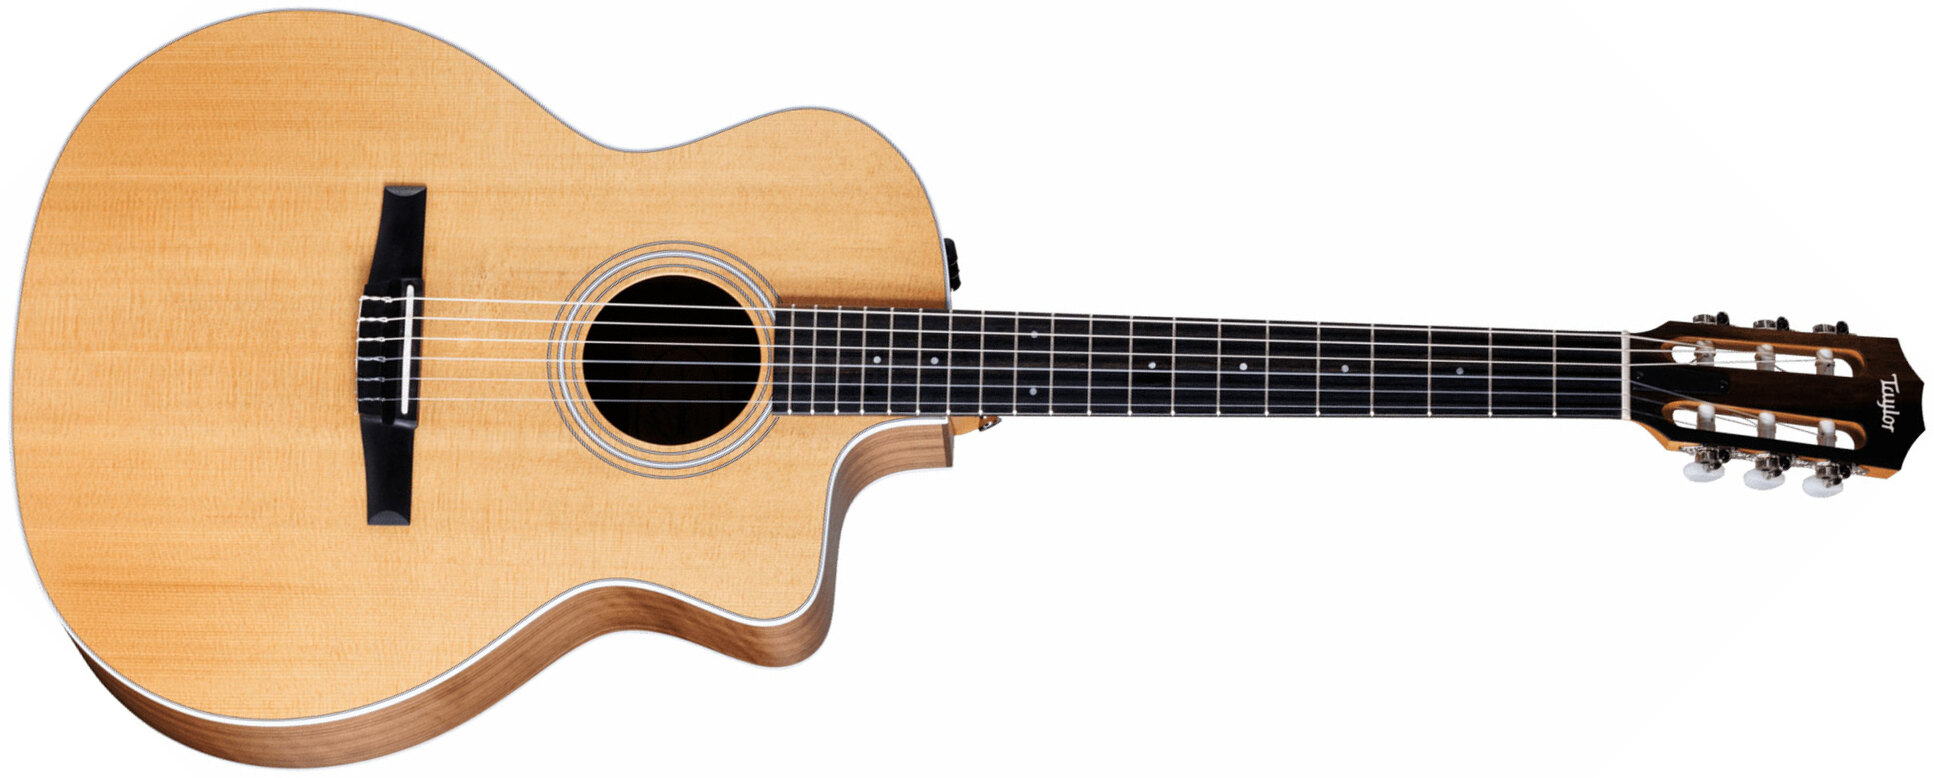 Taylor 214ce-n 2024 Grand Auditorium Cw Epicea Noyer Eb Esn - Natural - Classical guitar 4/4 size - Main picture